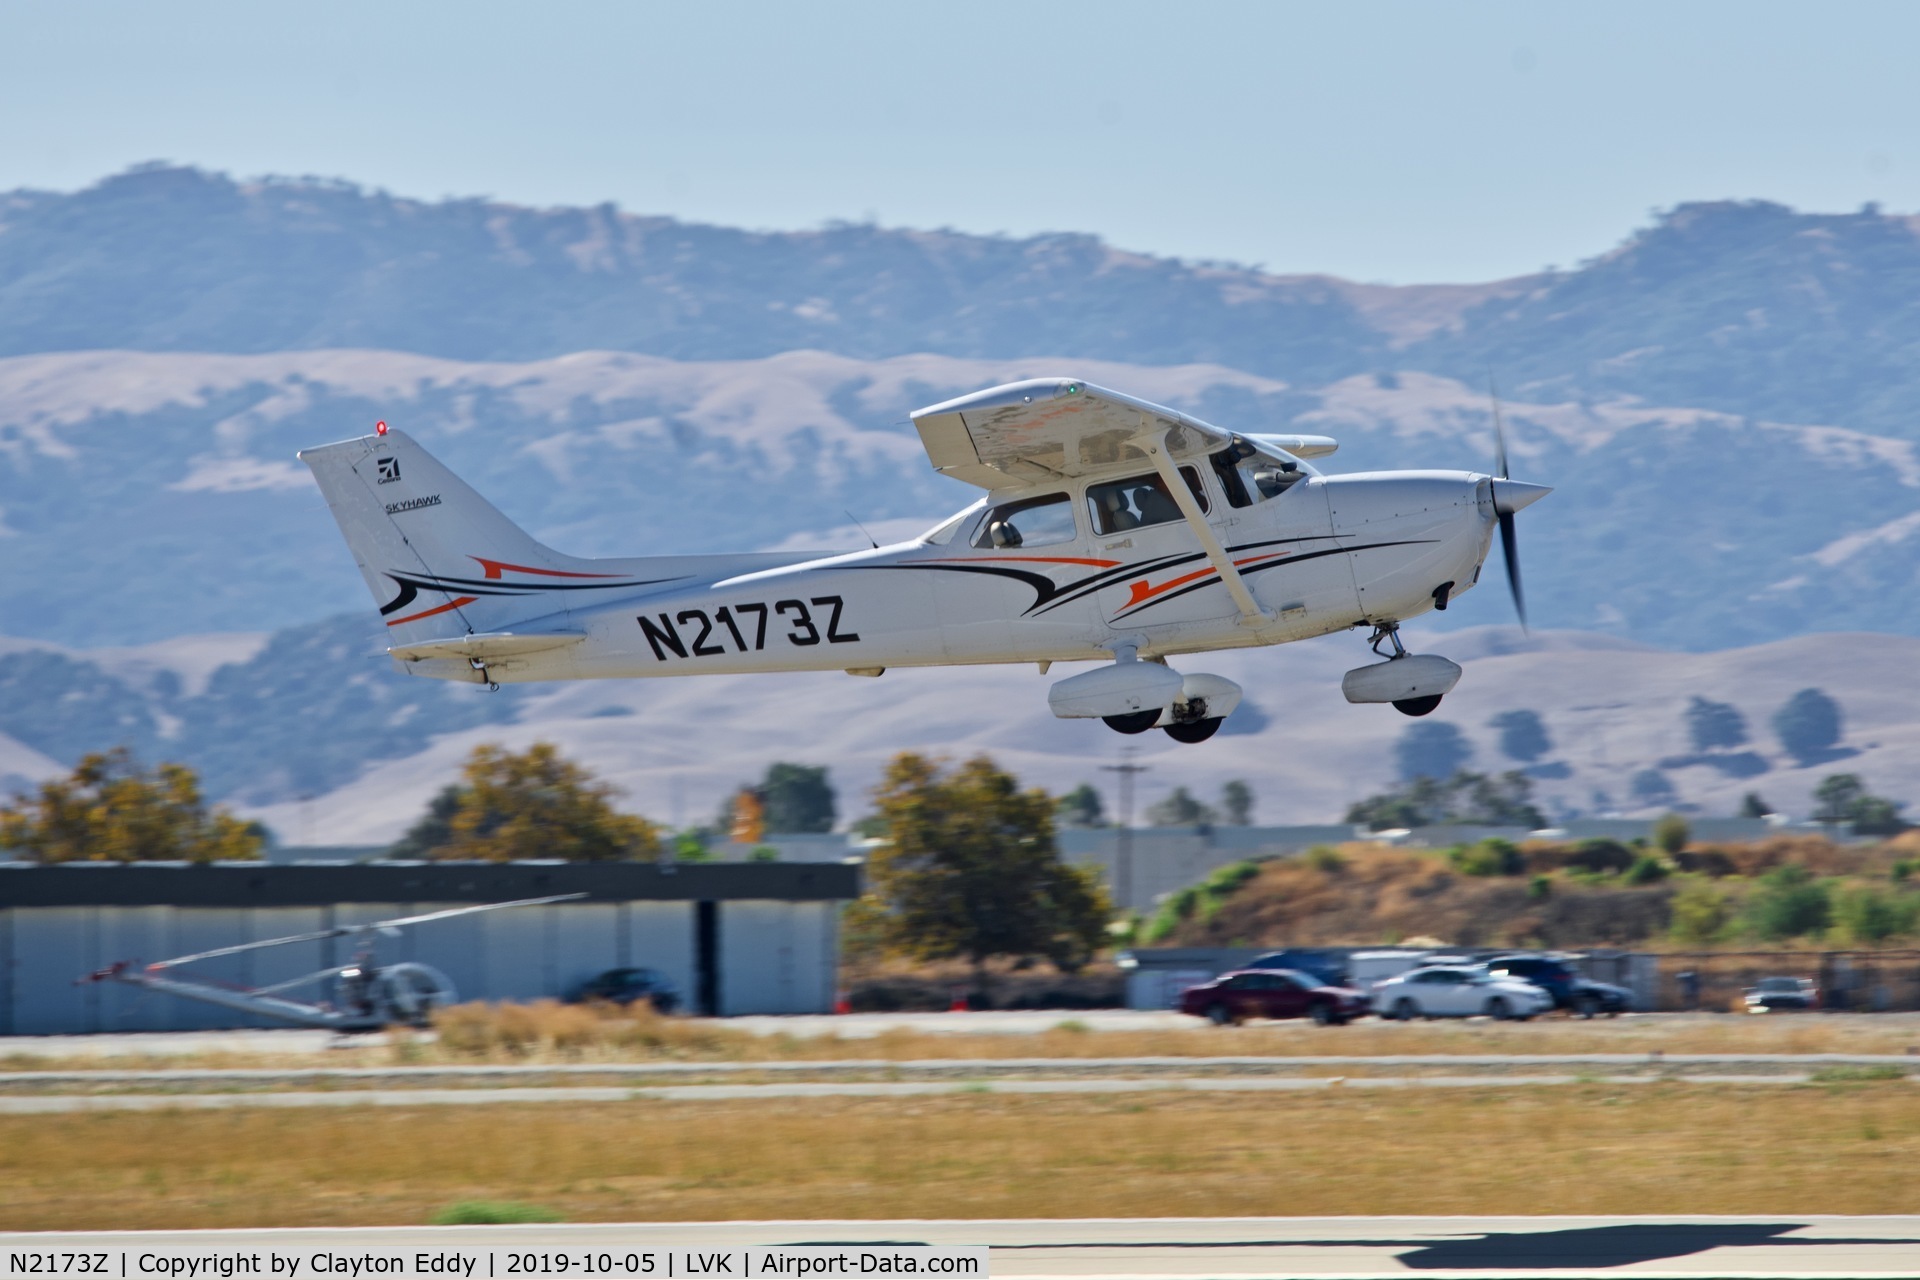 N2173Z, 2004 Cessna 172R C/N 17281216, Livermore airport airshow 2019.